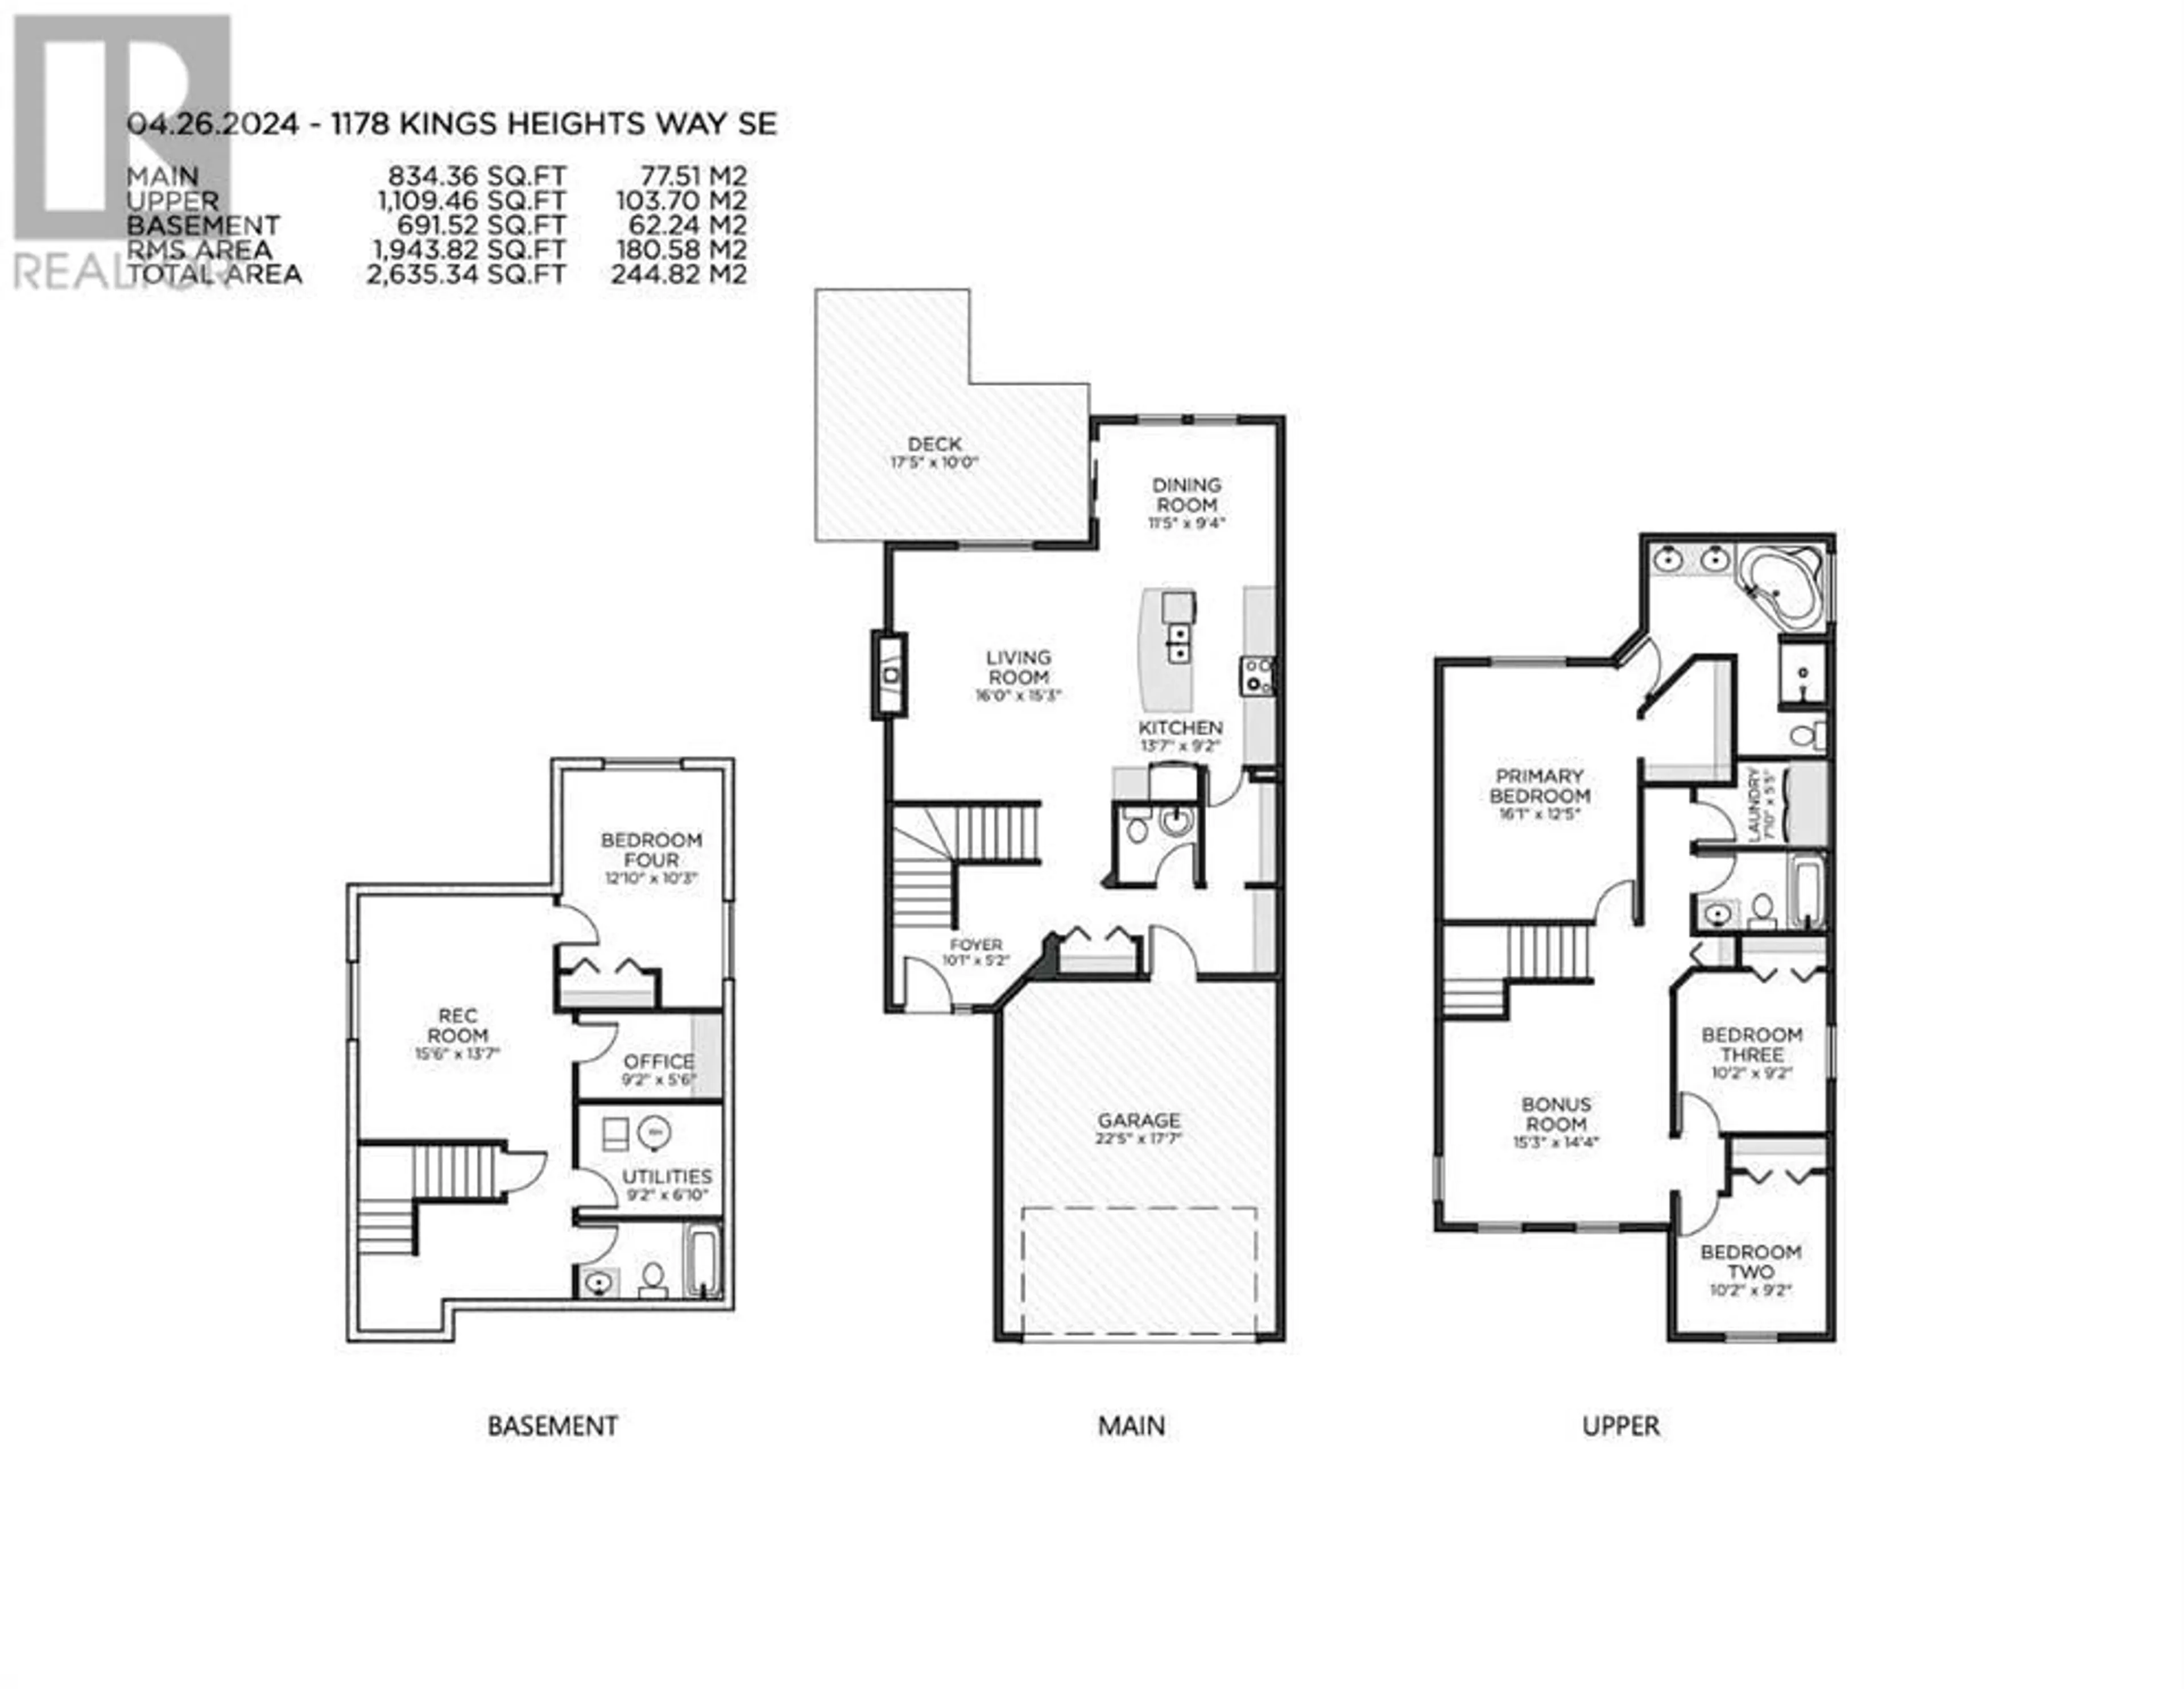 Floor plan for 1178 Kings Heights Way SE, Airdrie Alberta T4A0S4